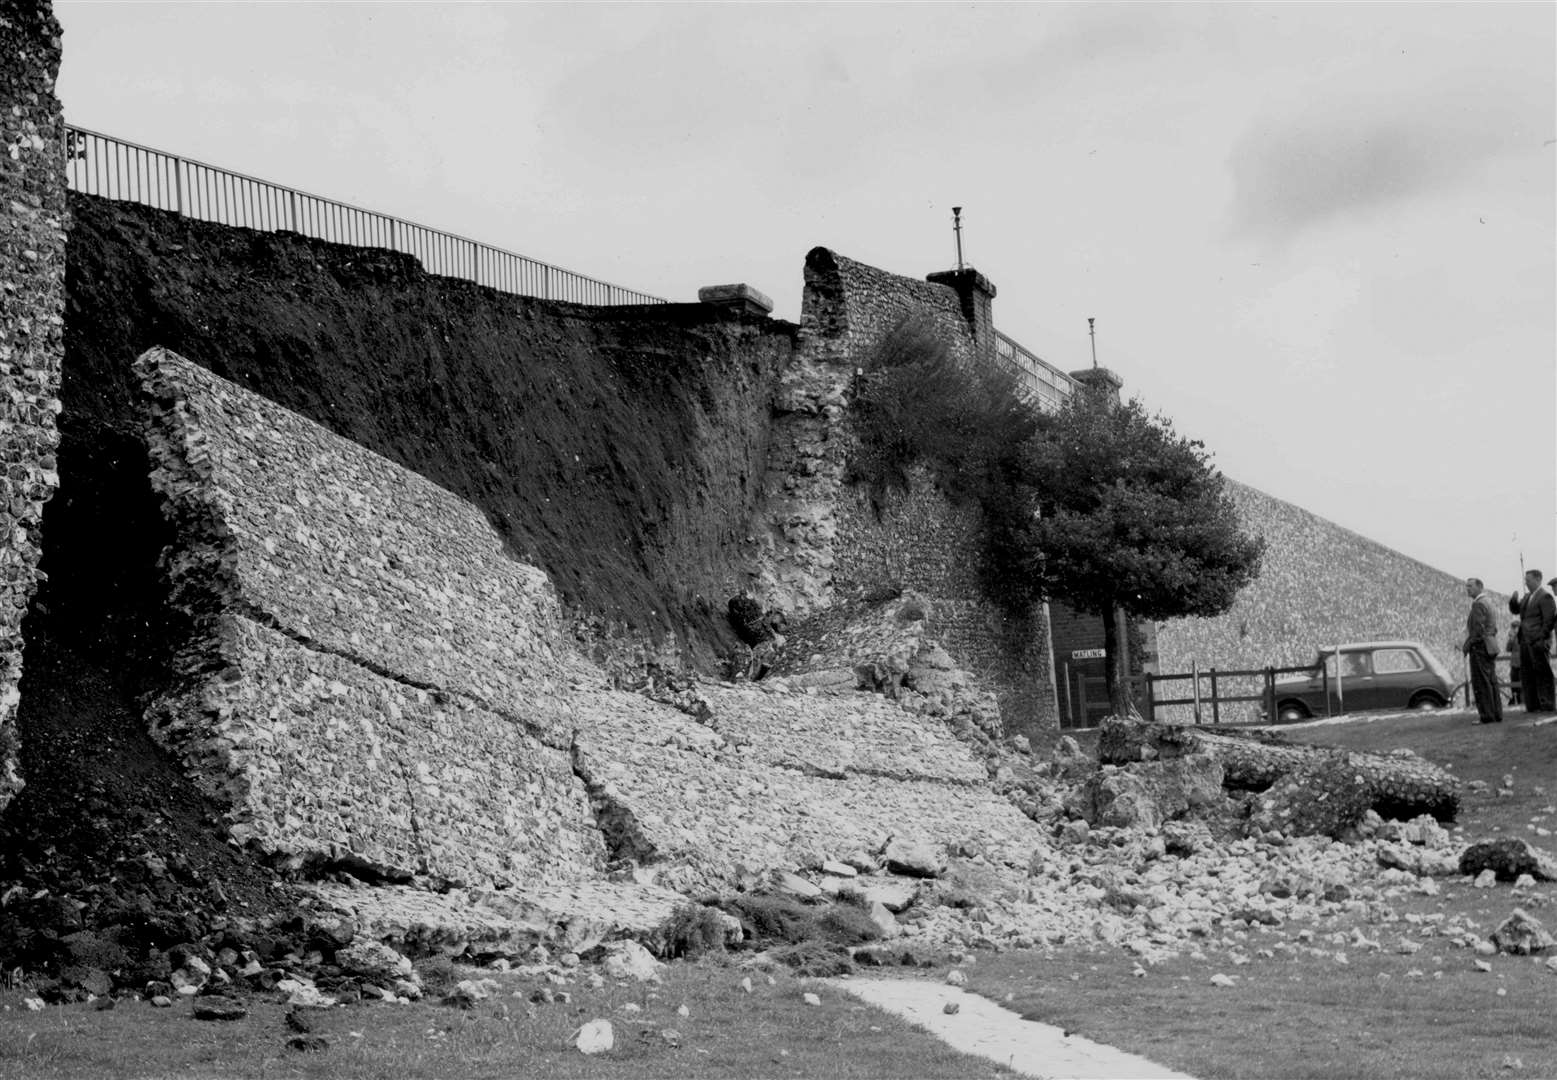 Rebuilt after bomb damage in the war, this 20-yard section of the city wall in Canterbury near Riding Gate collapsed in August 1962